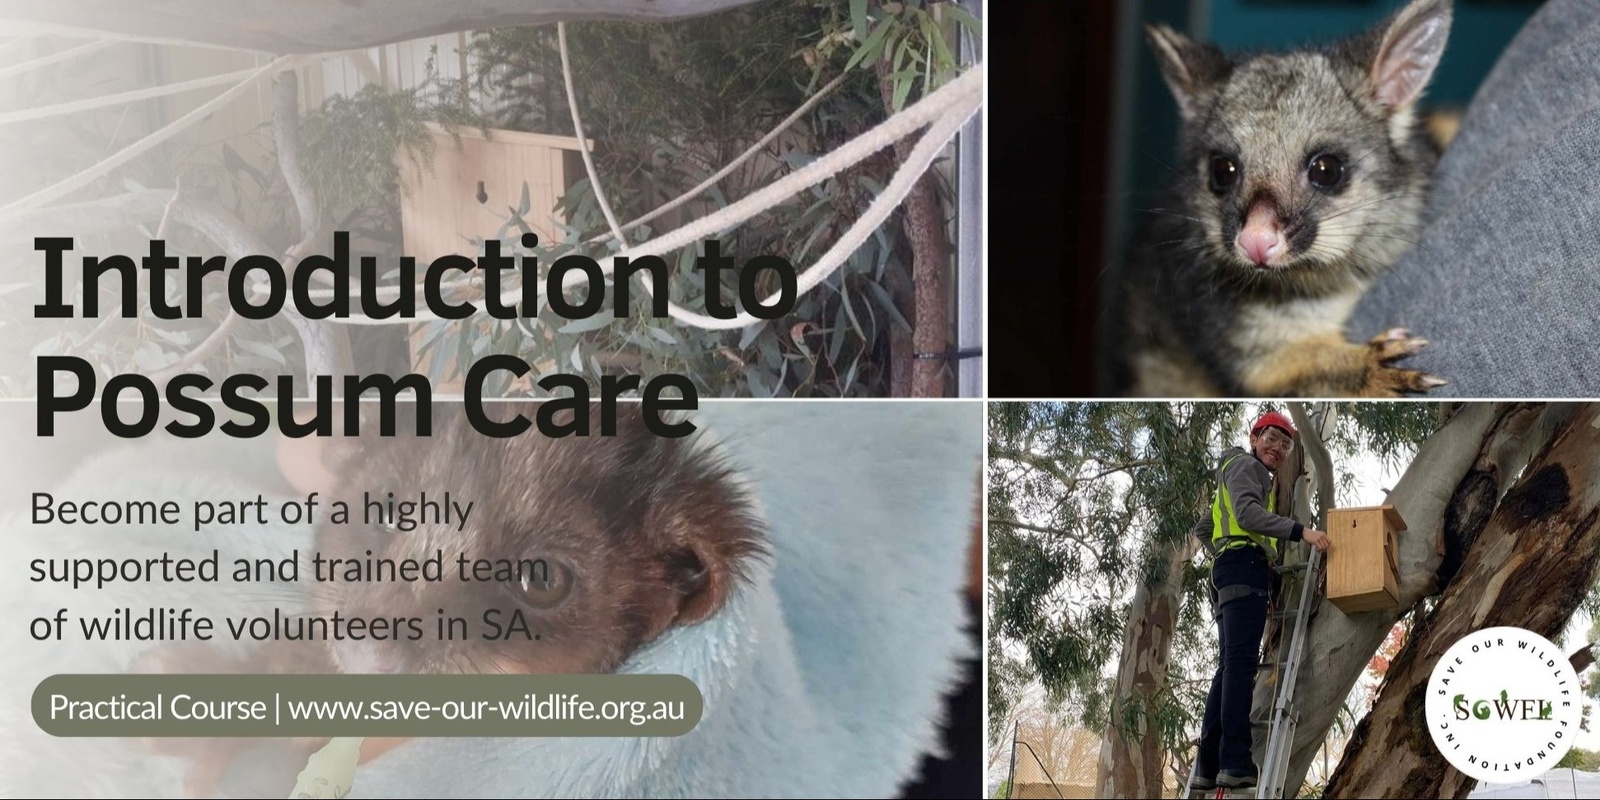 Banner image for Introduction to Possum Care and Rescue 